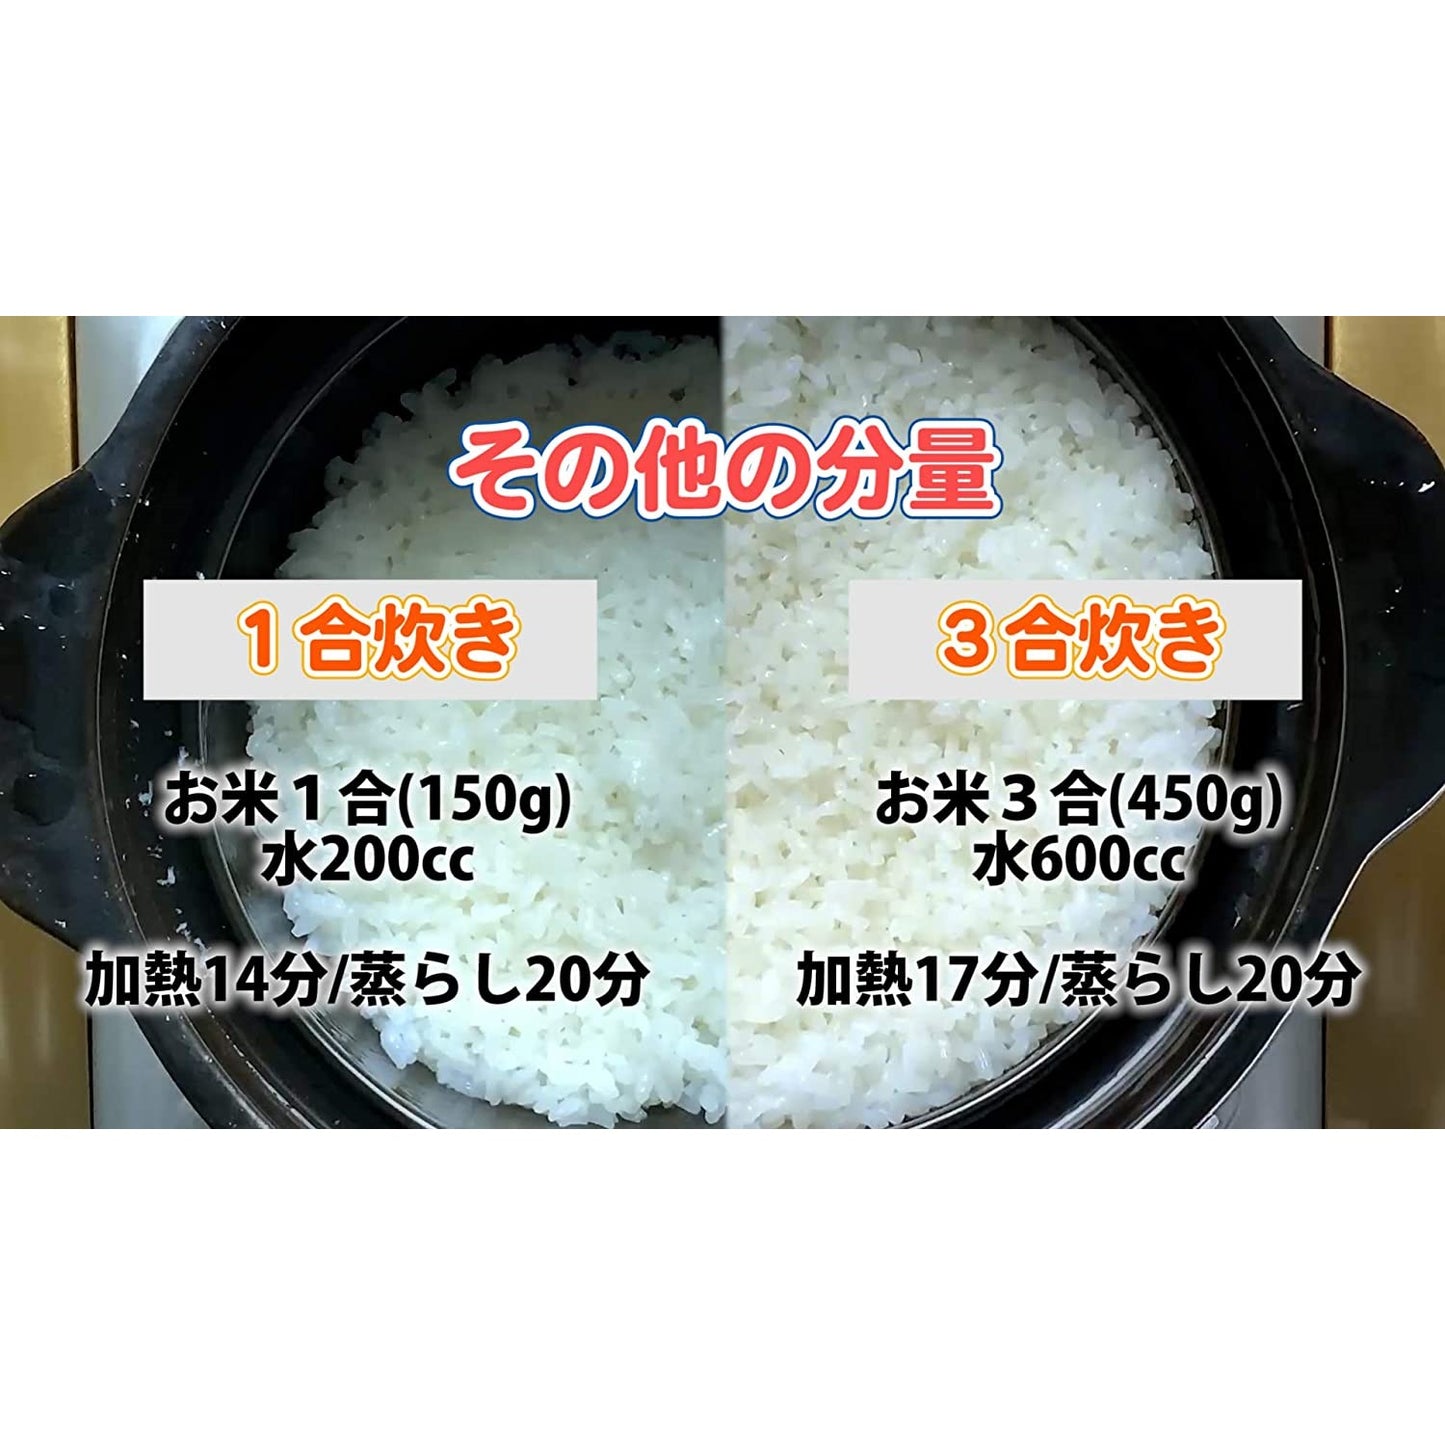 Japanese Style Rice Cooker (Made in Japan)